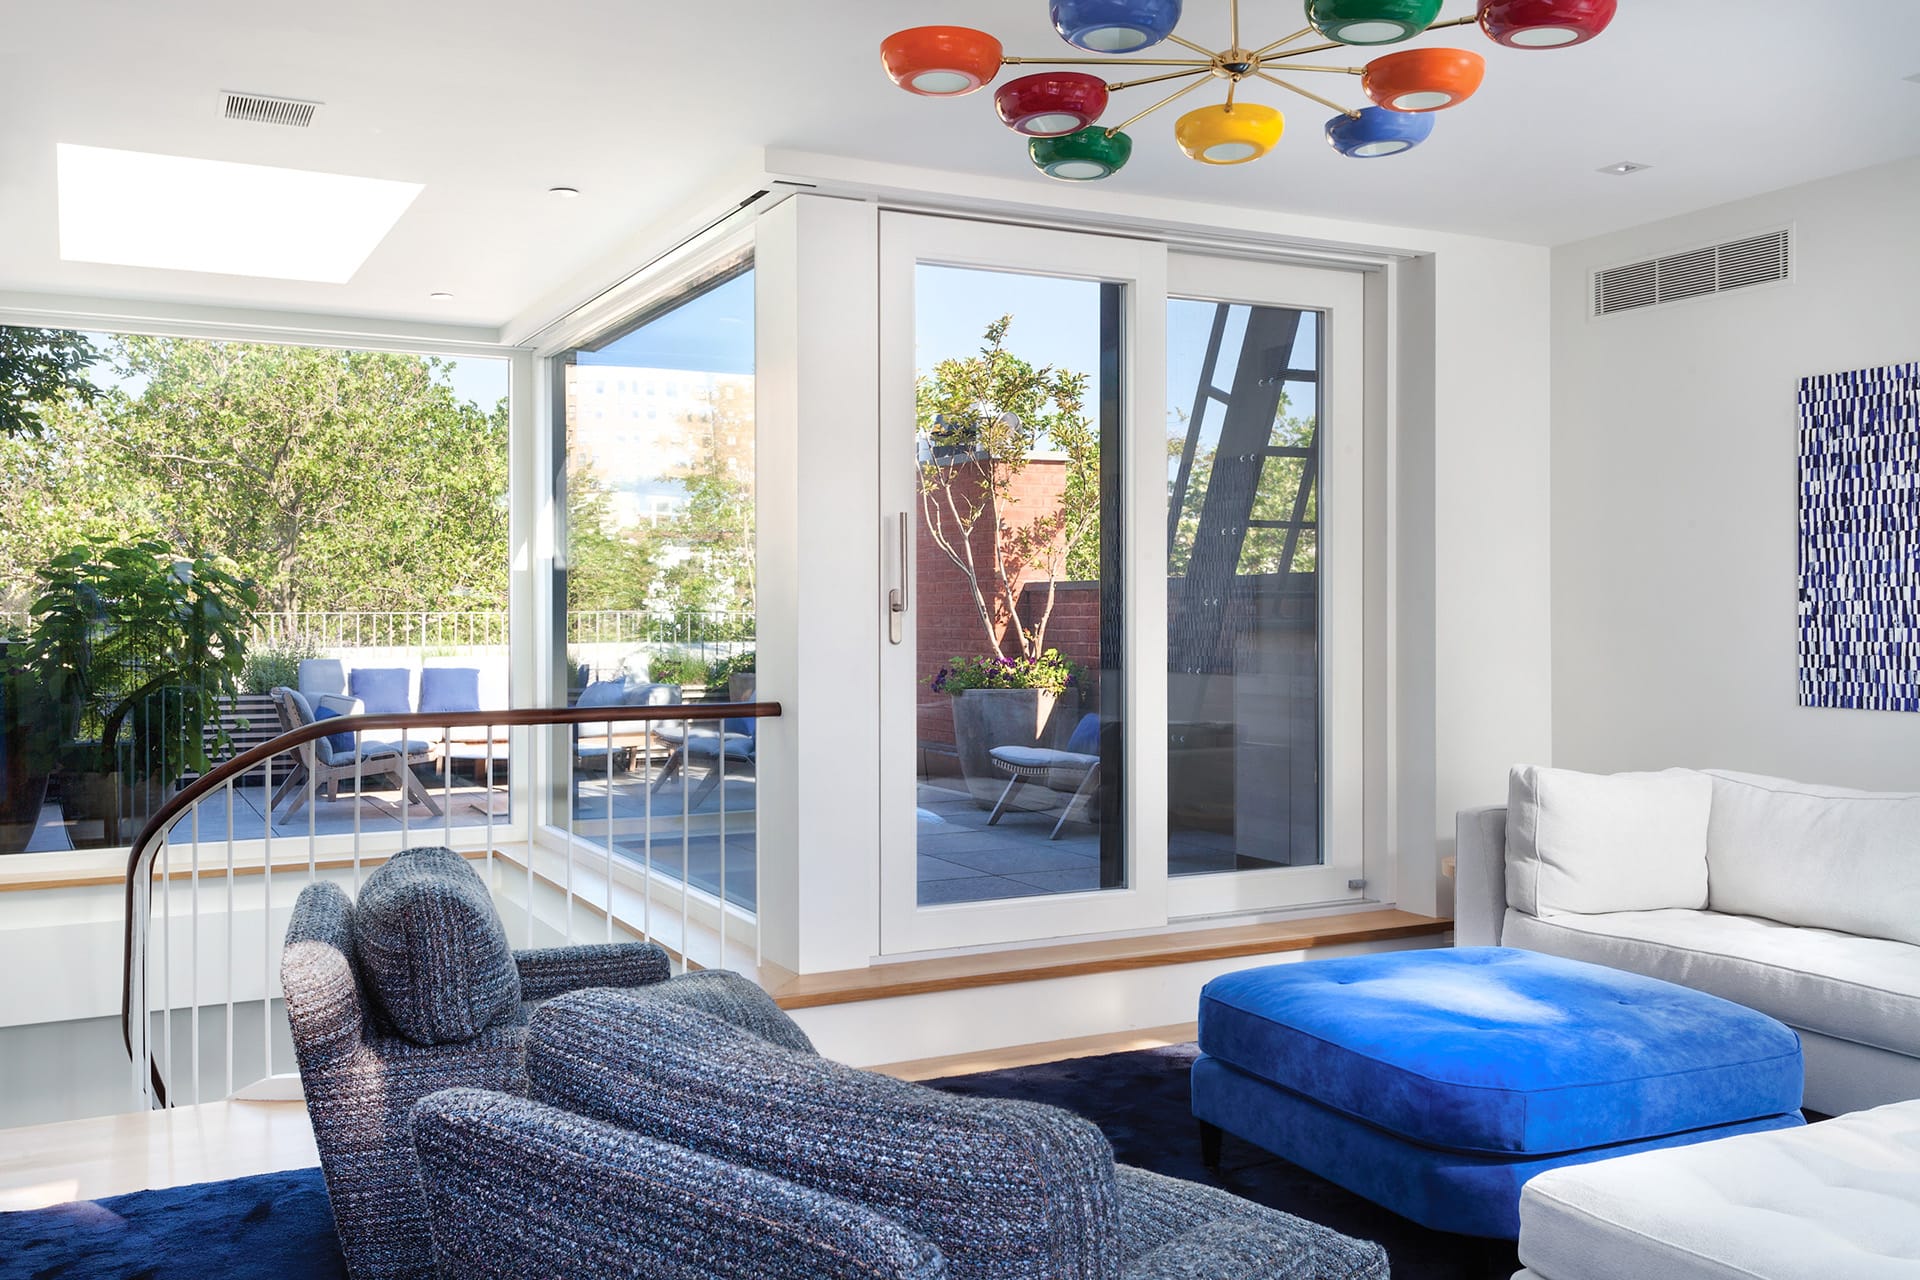 Penthouse in a Brooklyn Heights townhouse with blue carpet, painting, ottoman, and armchairs. A colorful light fixture hangs off the ceiling, and the rooftop deck can be seen through the large windows and glass door.